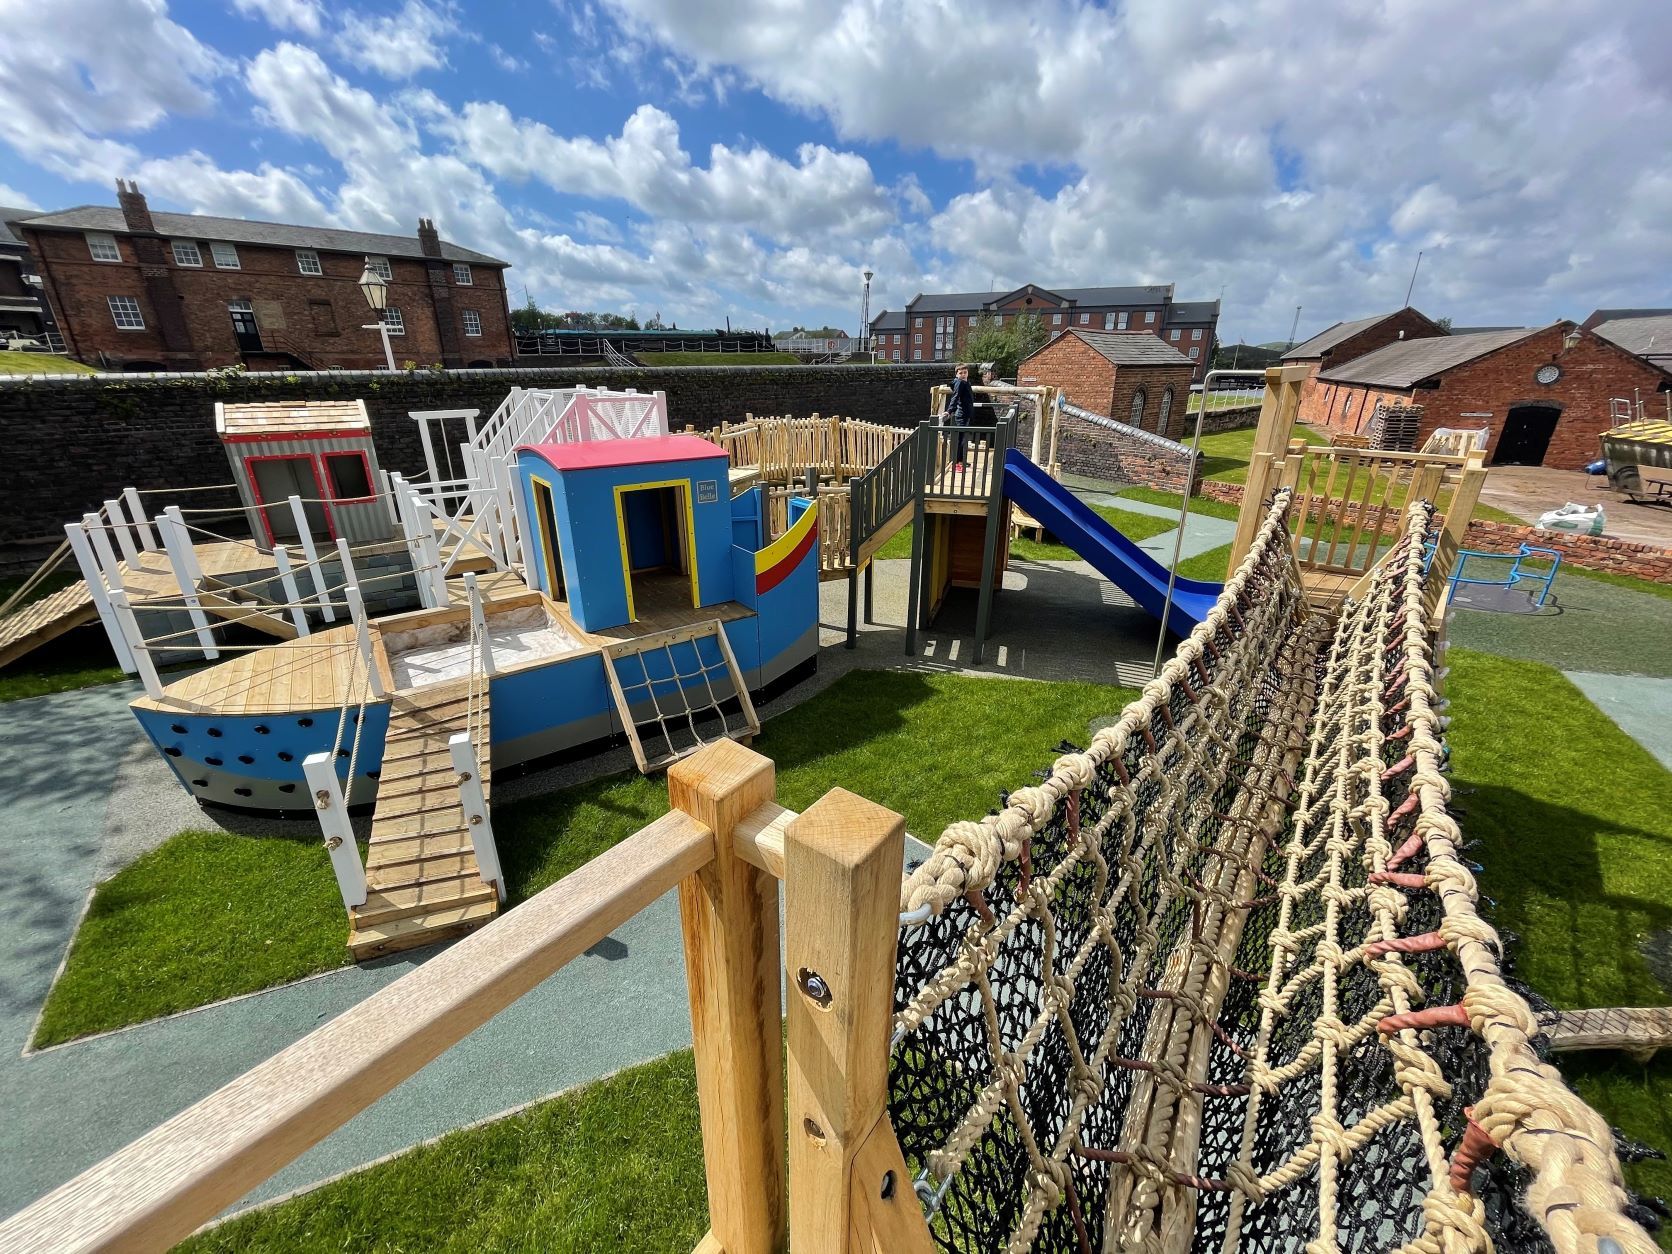 The play area at the National Waterways Museum.